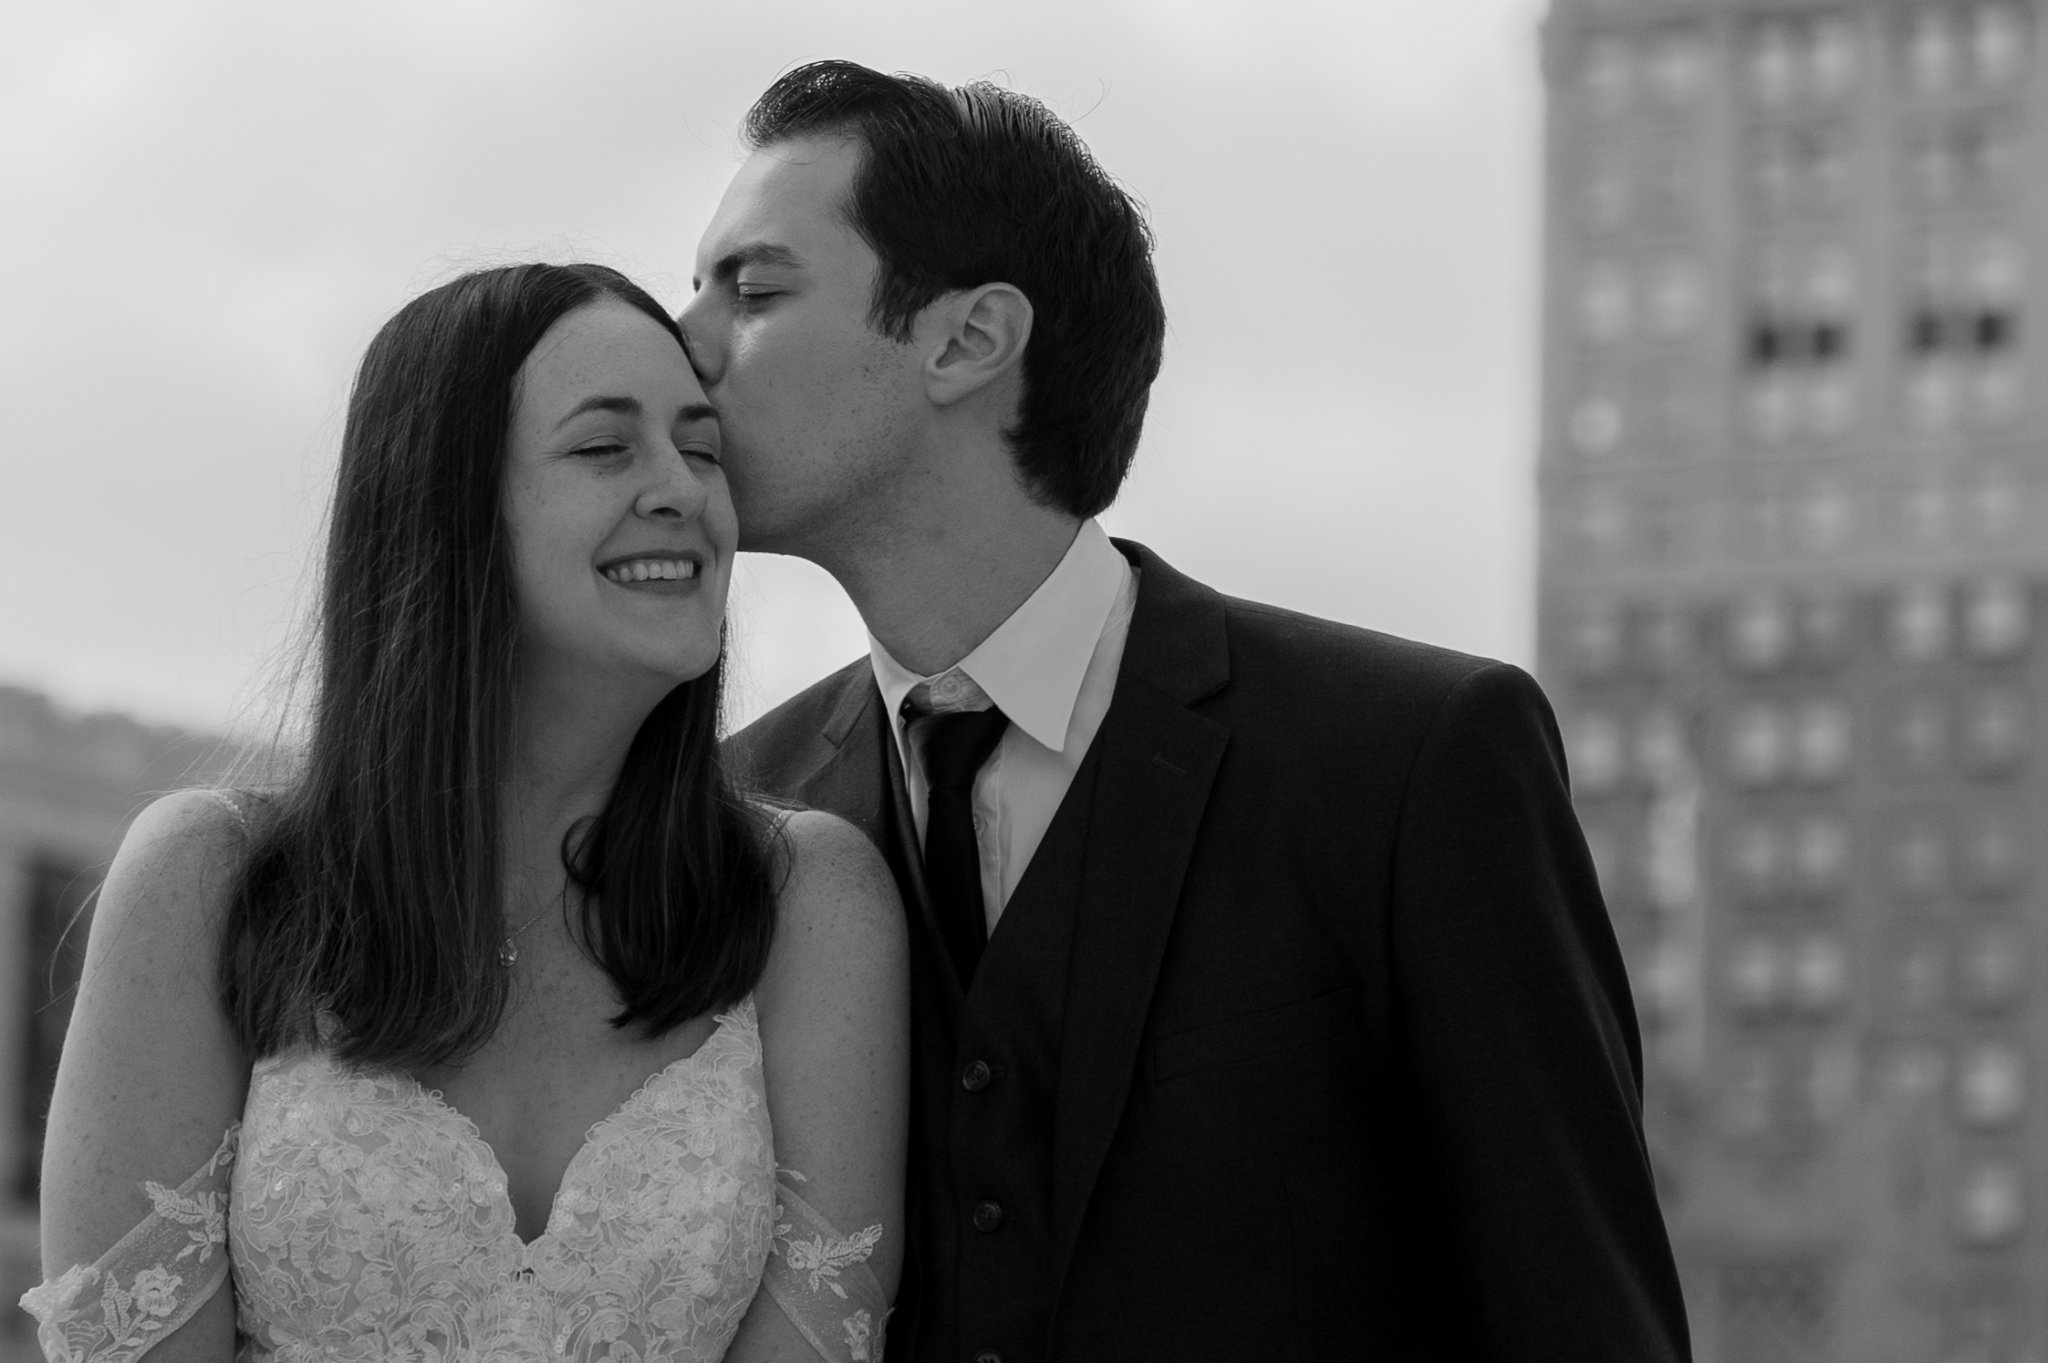 Black and white photo of groom kissing the bride's temple, in an urban setting